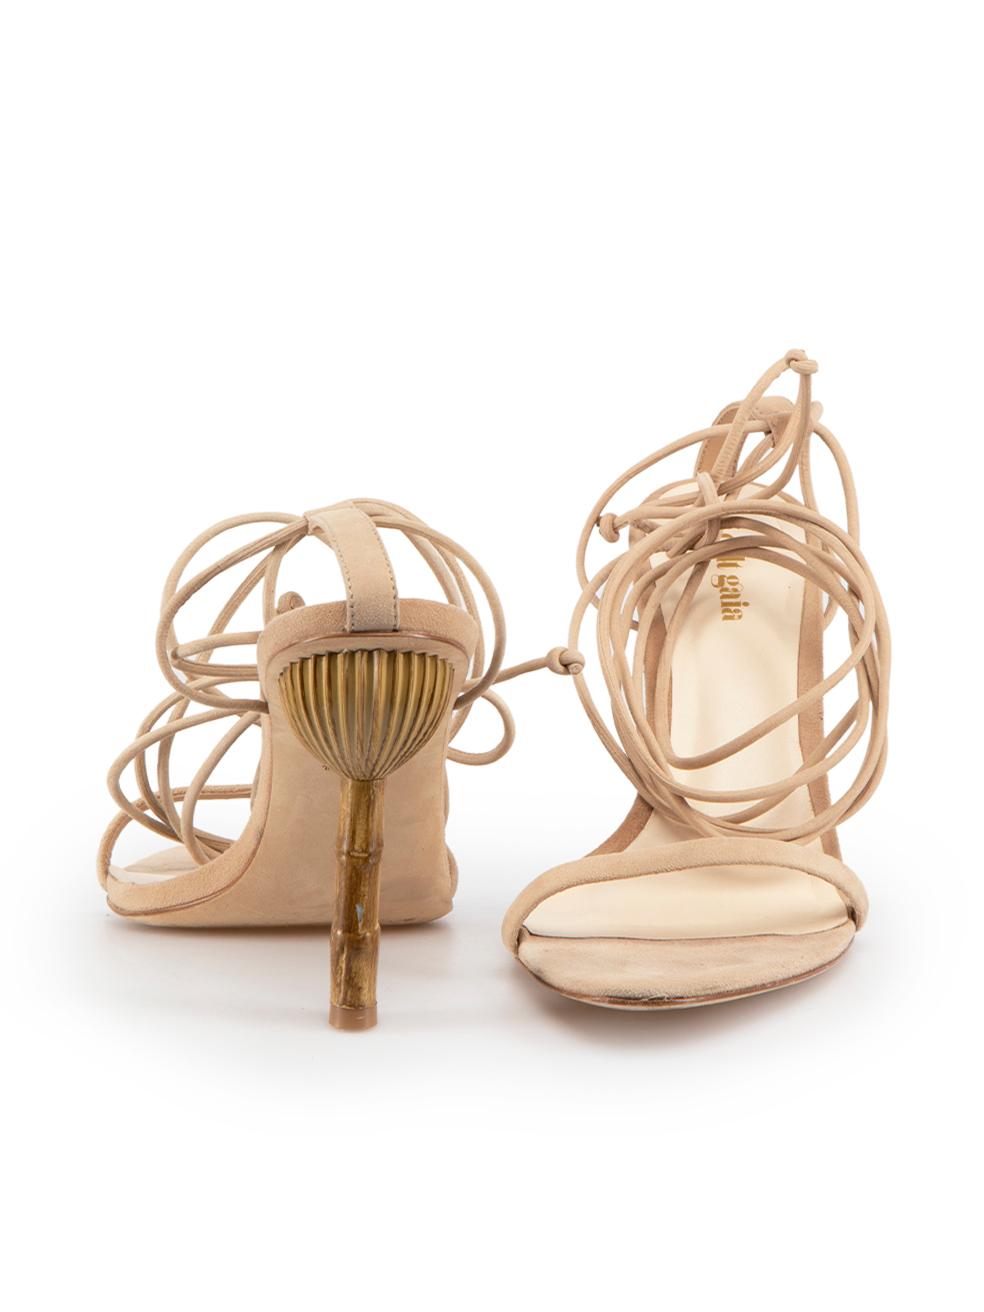 Cult Gaia Beige Suede Bamboo Heeled Sandals Size IT 40.5 In Good Condition For Sale In London, GB